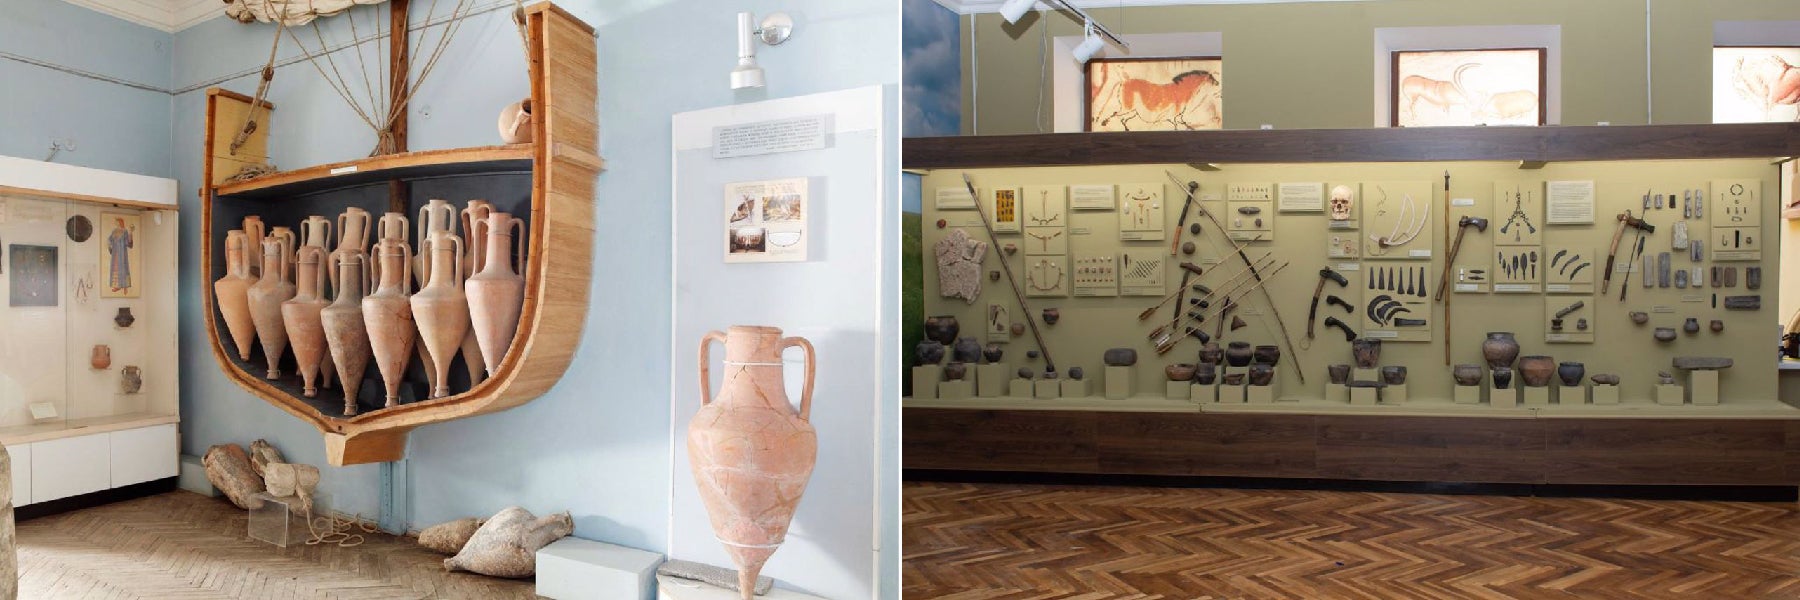 Side-by-side photos of museum displays